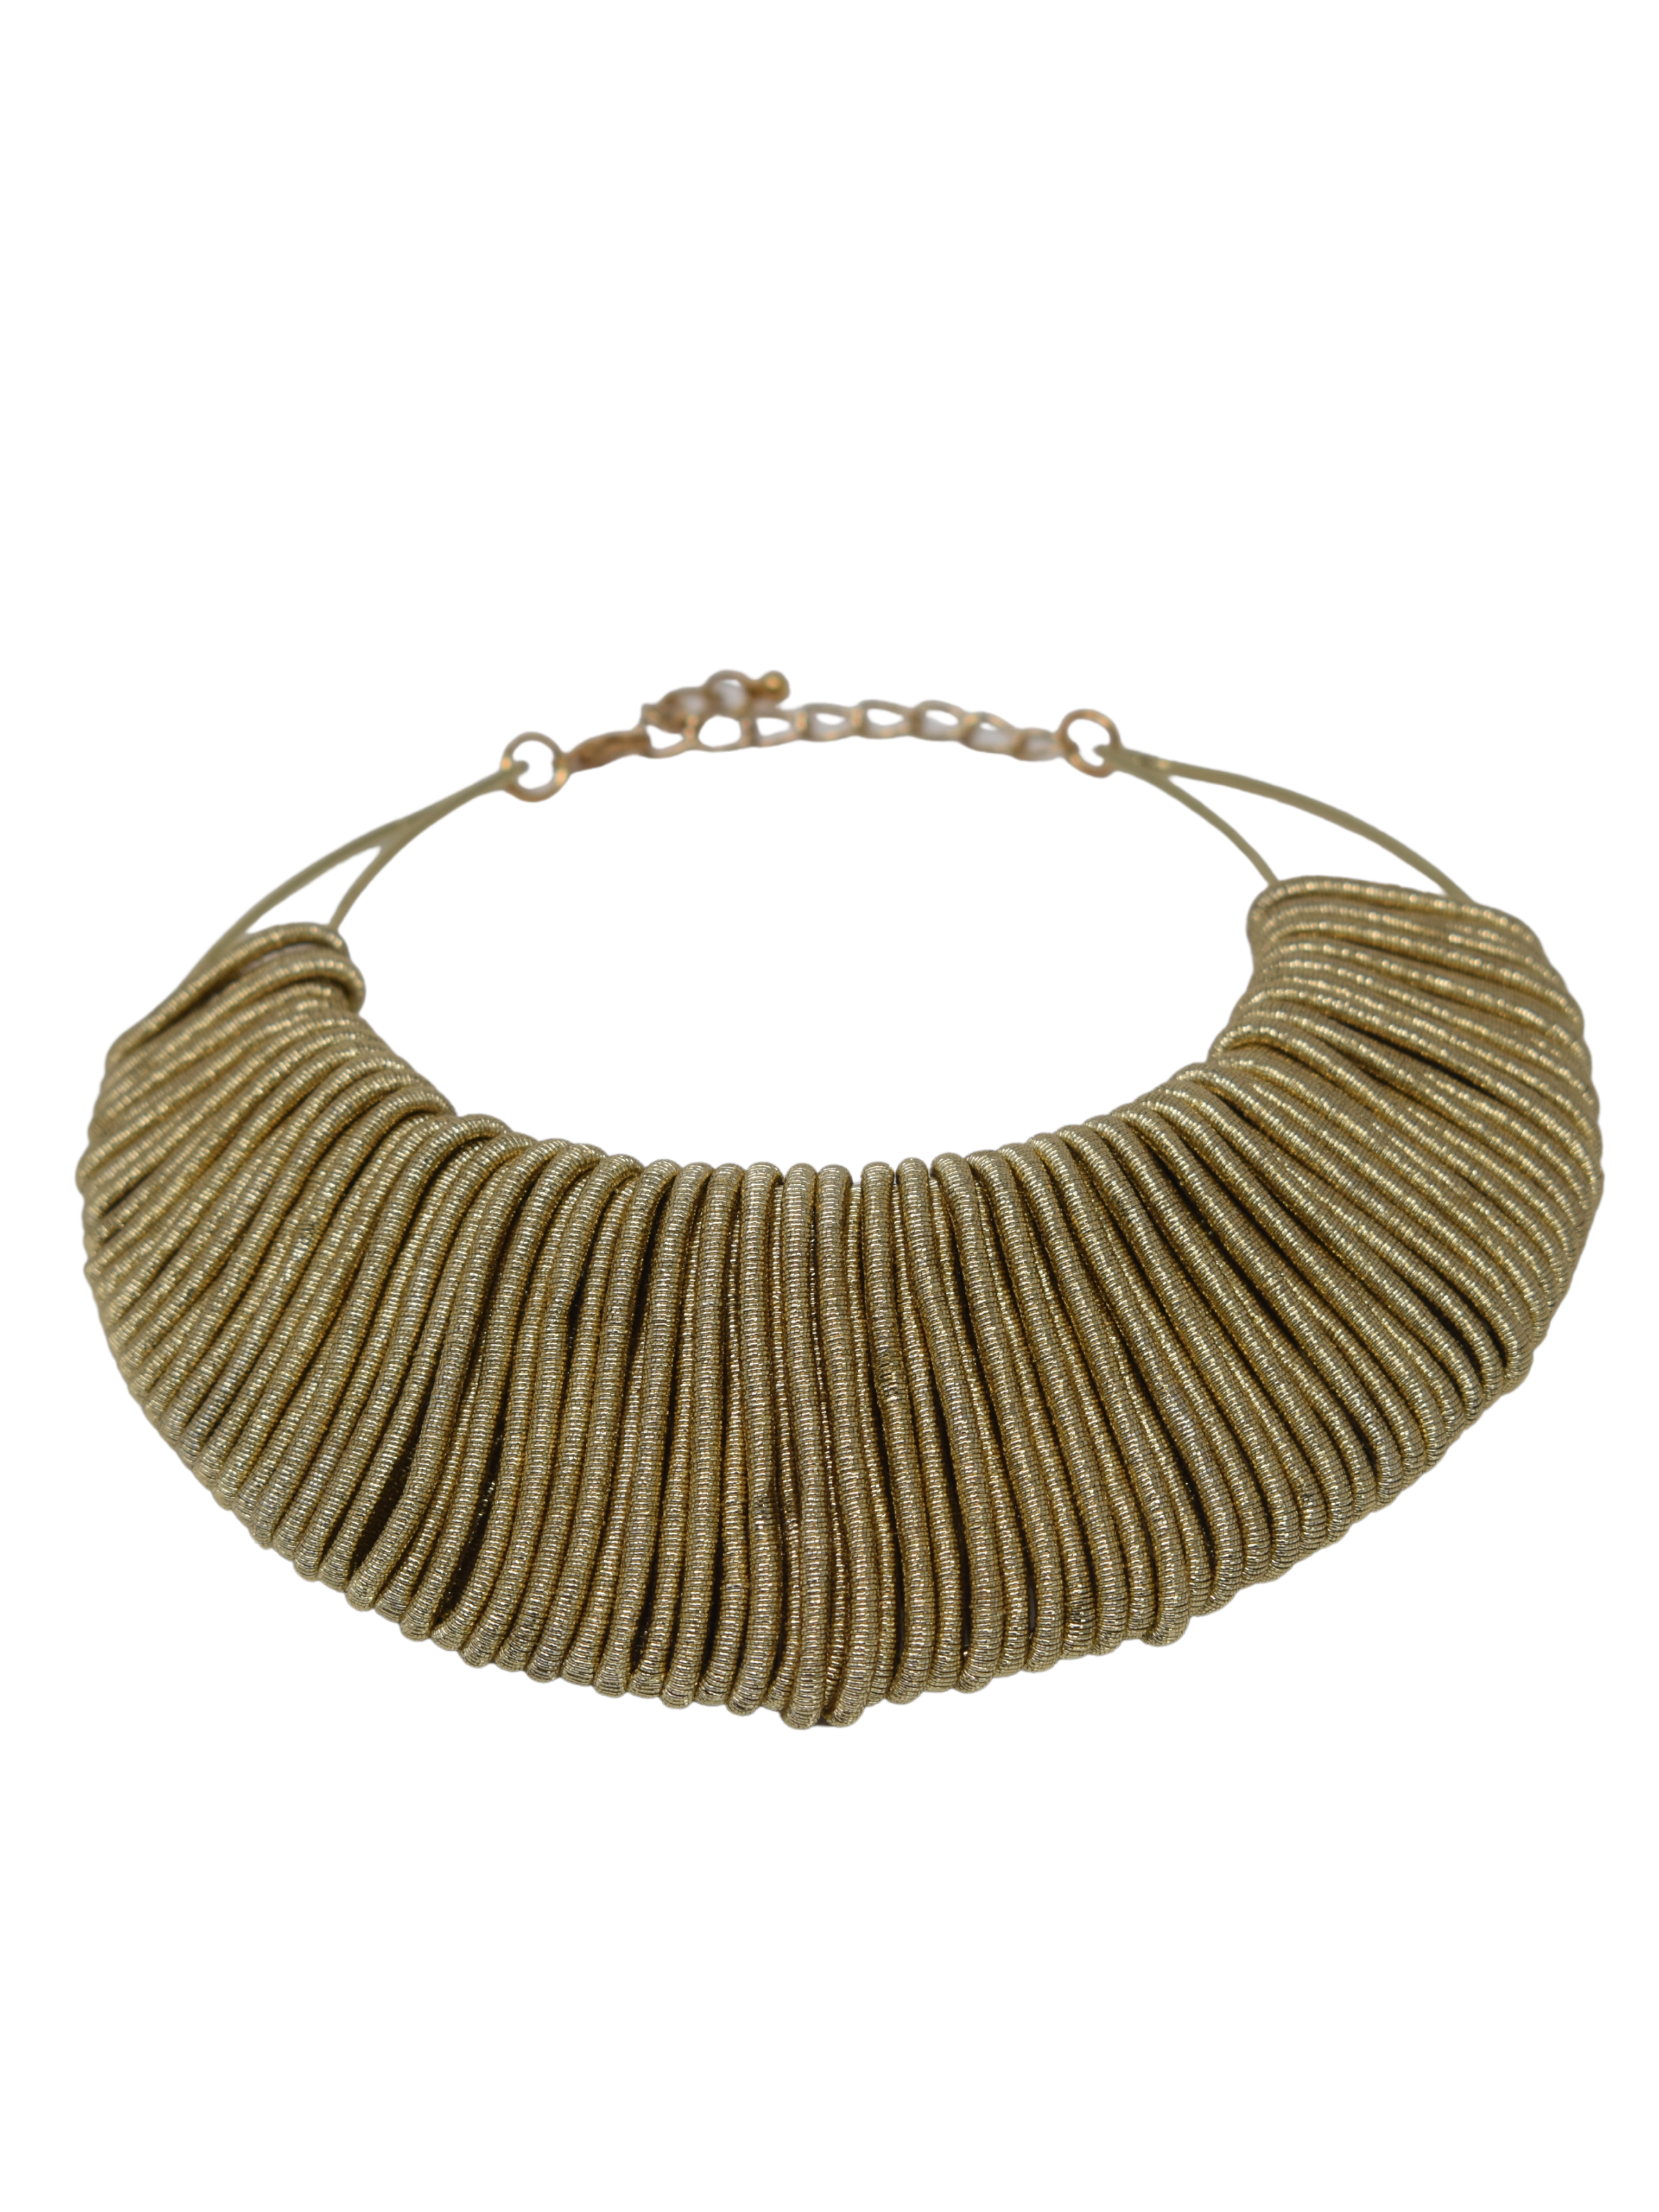 Distinctively cute our Hazel choker bib style Necklace will win them over every time. This Bib style necklace has gold tone and is wrapped in gold glitzy rope to form a beautiful design.